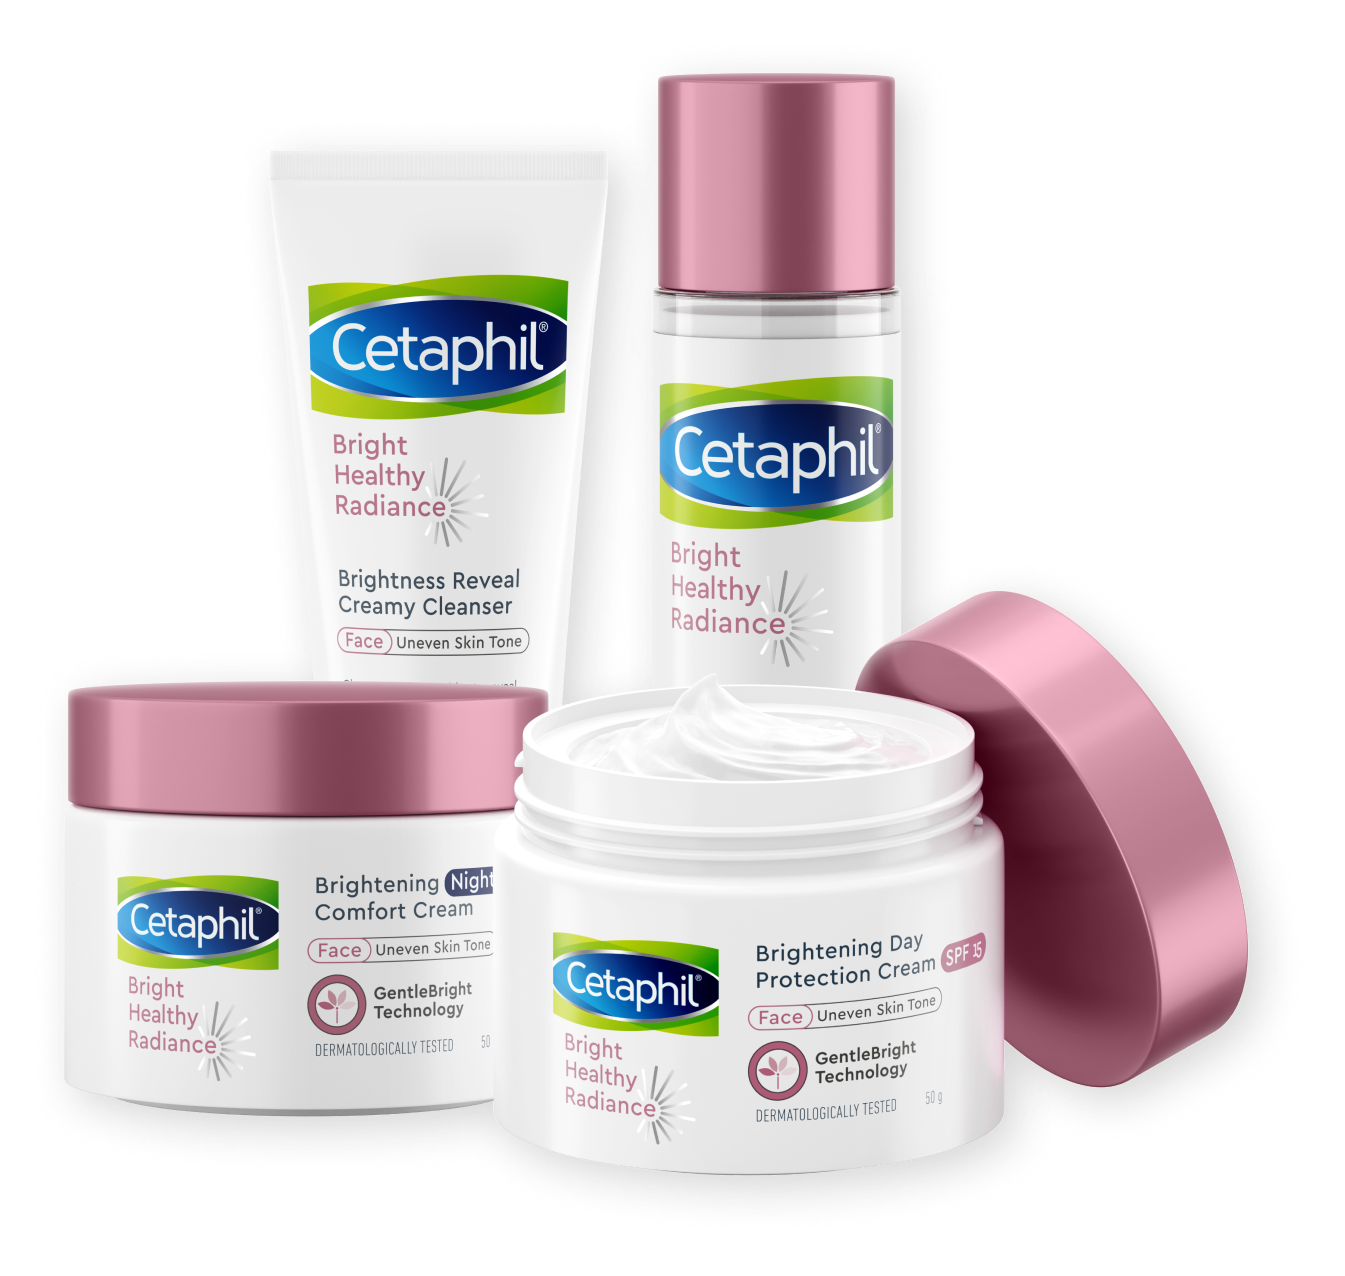 Cetaphil Bright Healthy Radiance product